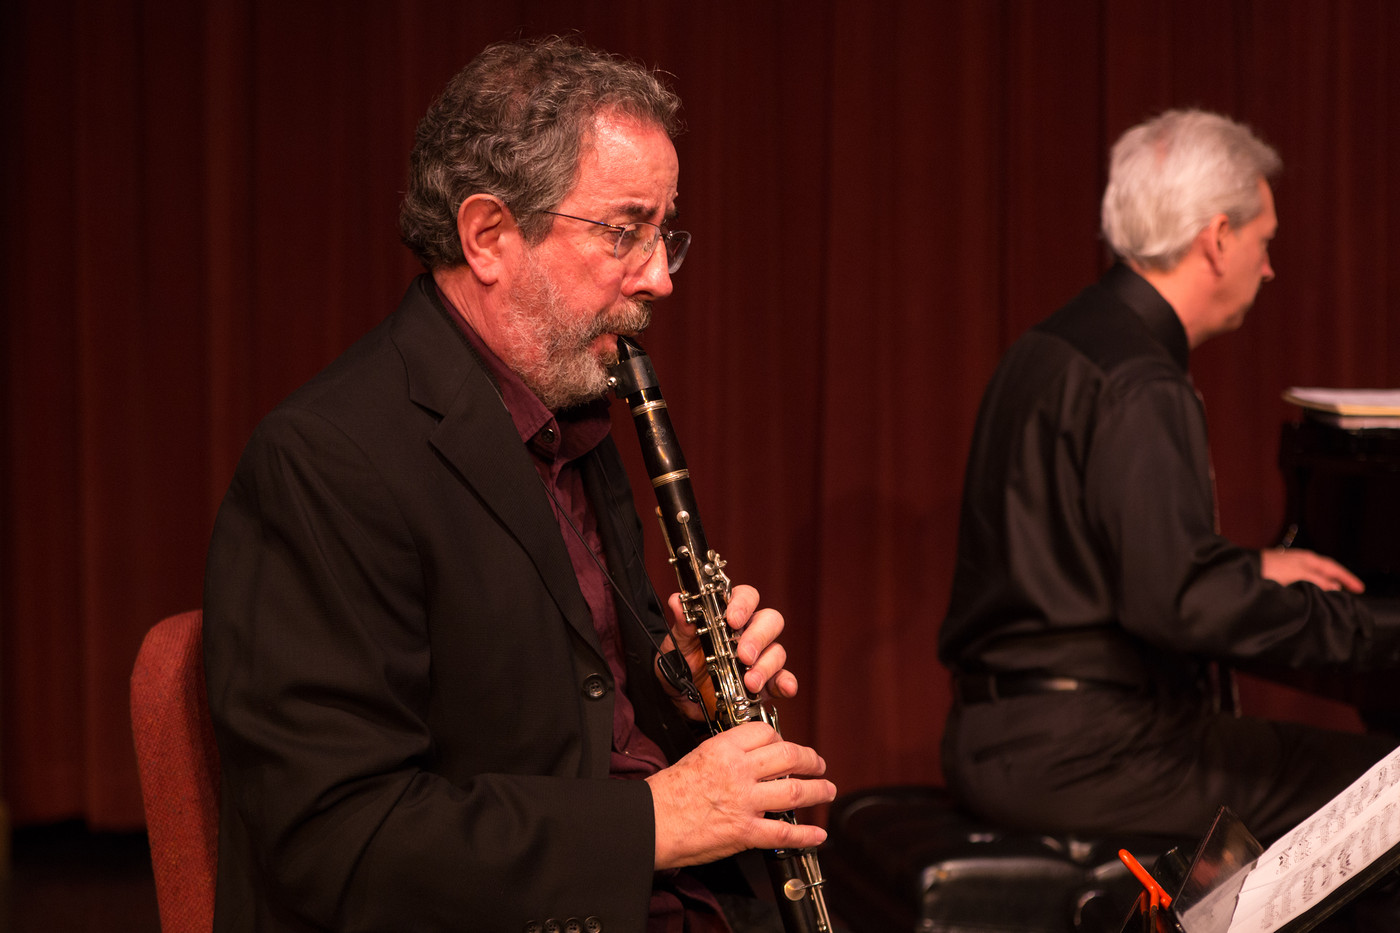 City College Professor Robert Knable plays the clarinet at a recital in the Performing Arts Center March 31, 2016. Hector Flores, Staff Photographer. | hectorfloresexpress@gmail.com